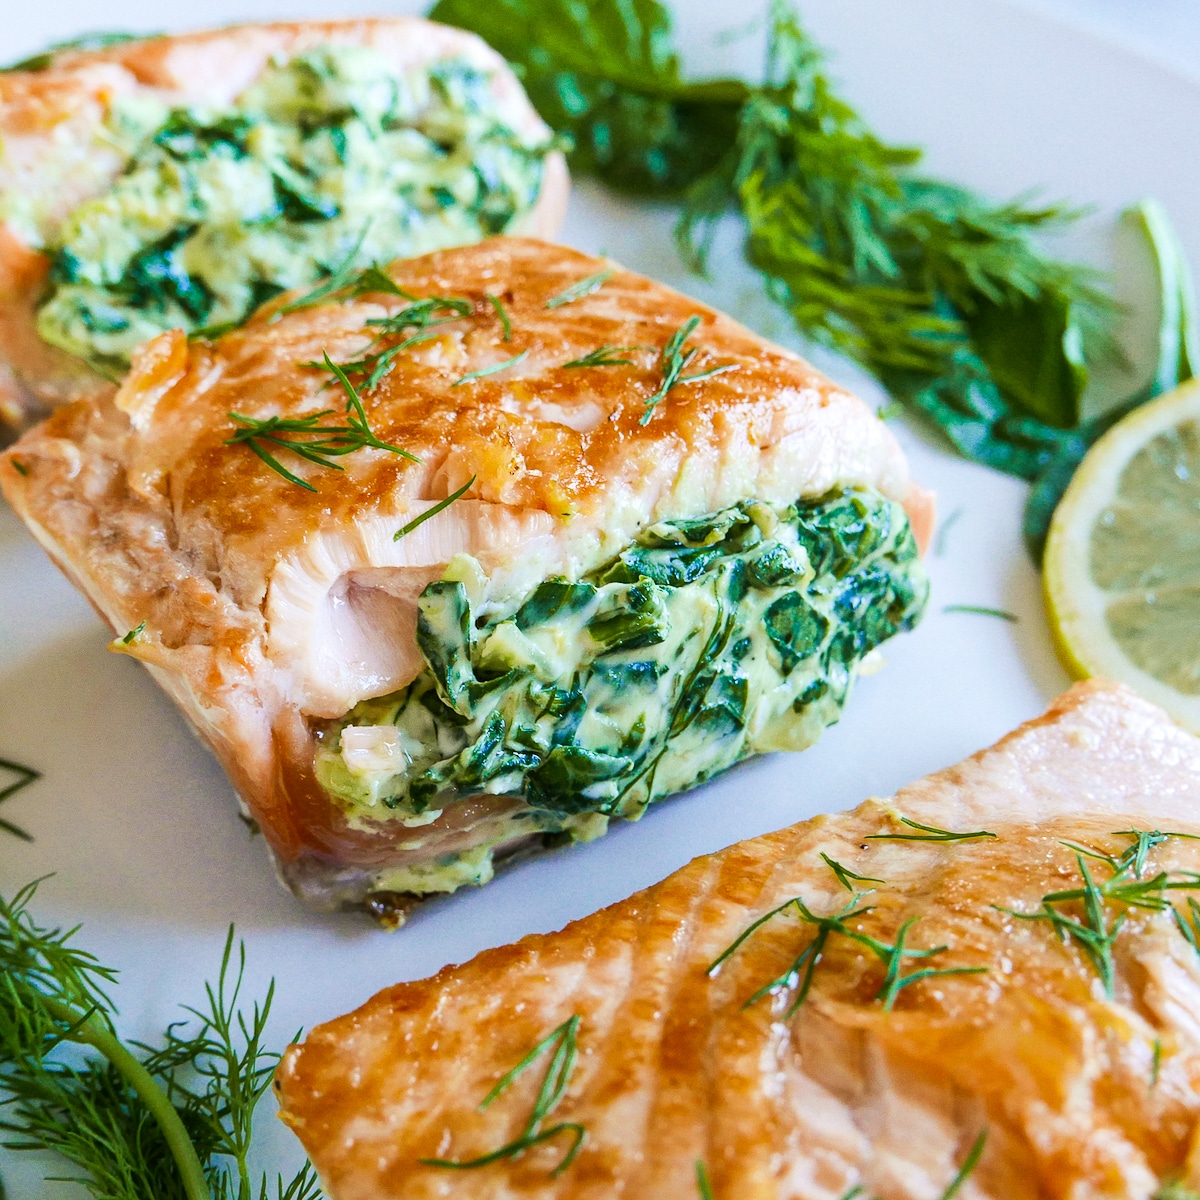 spinach mixture stuffed into side of salmon fillet.